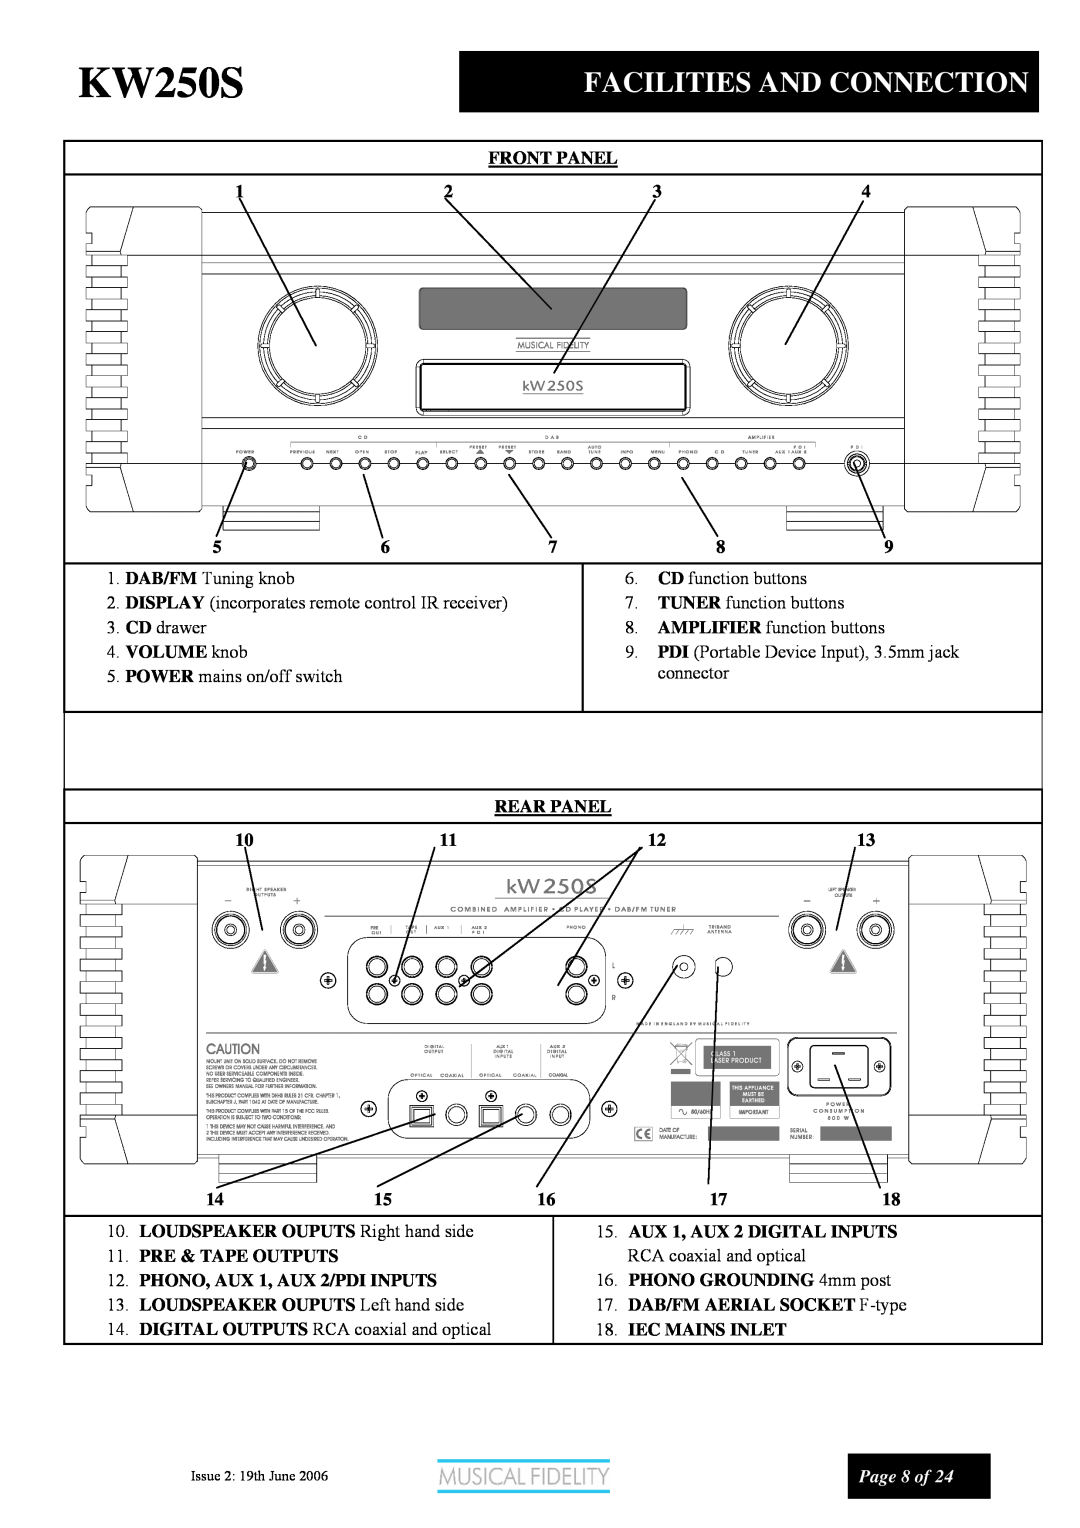 Musical Fidelity KW250S manual Facilities And Connection, Page 8 of 